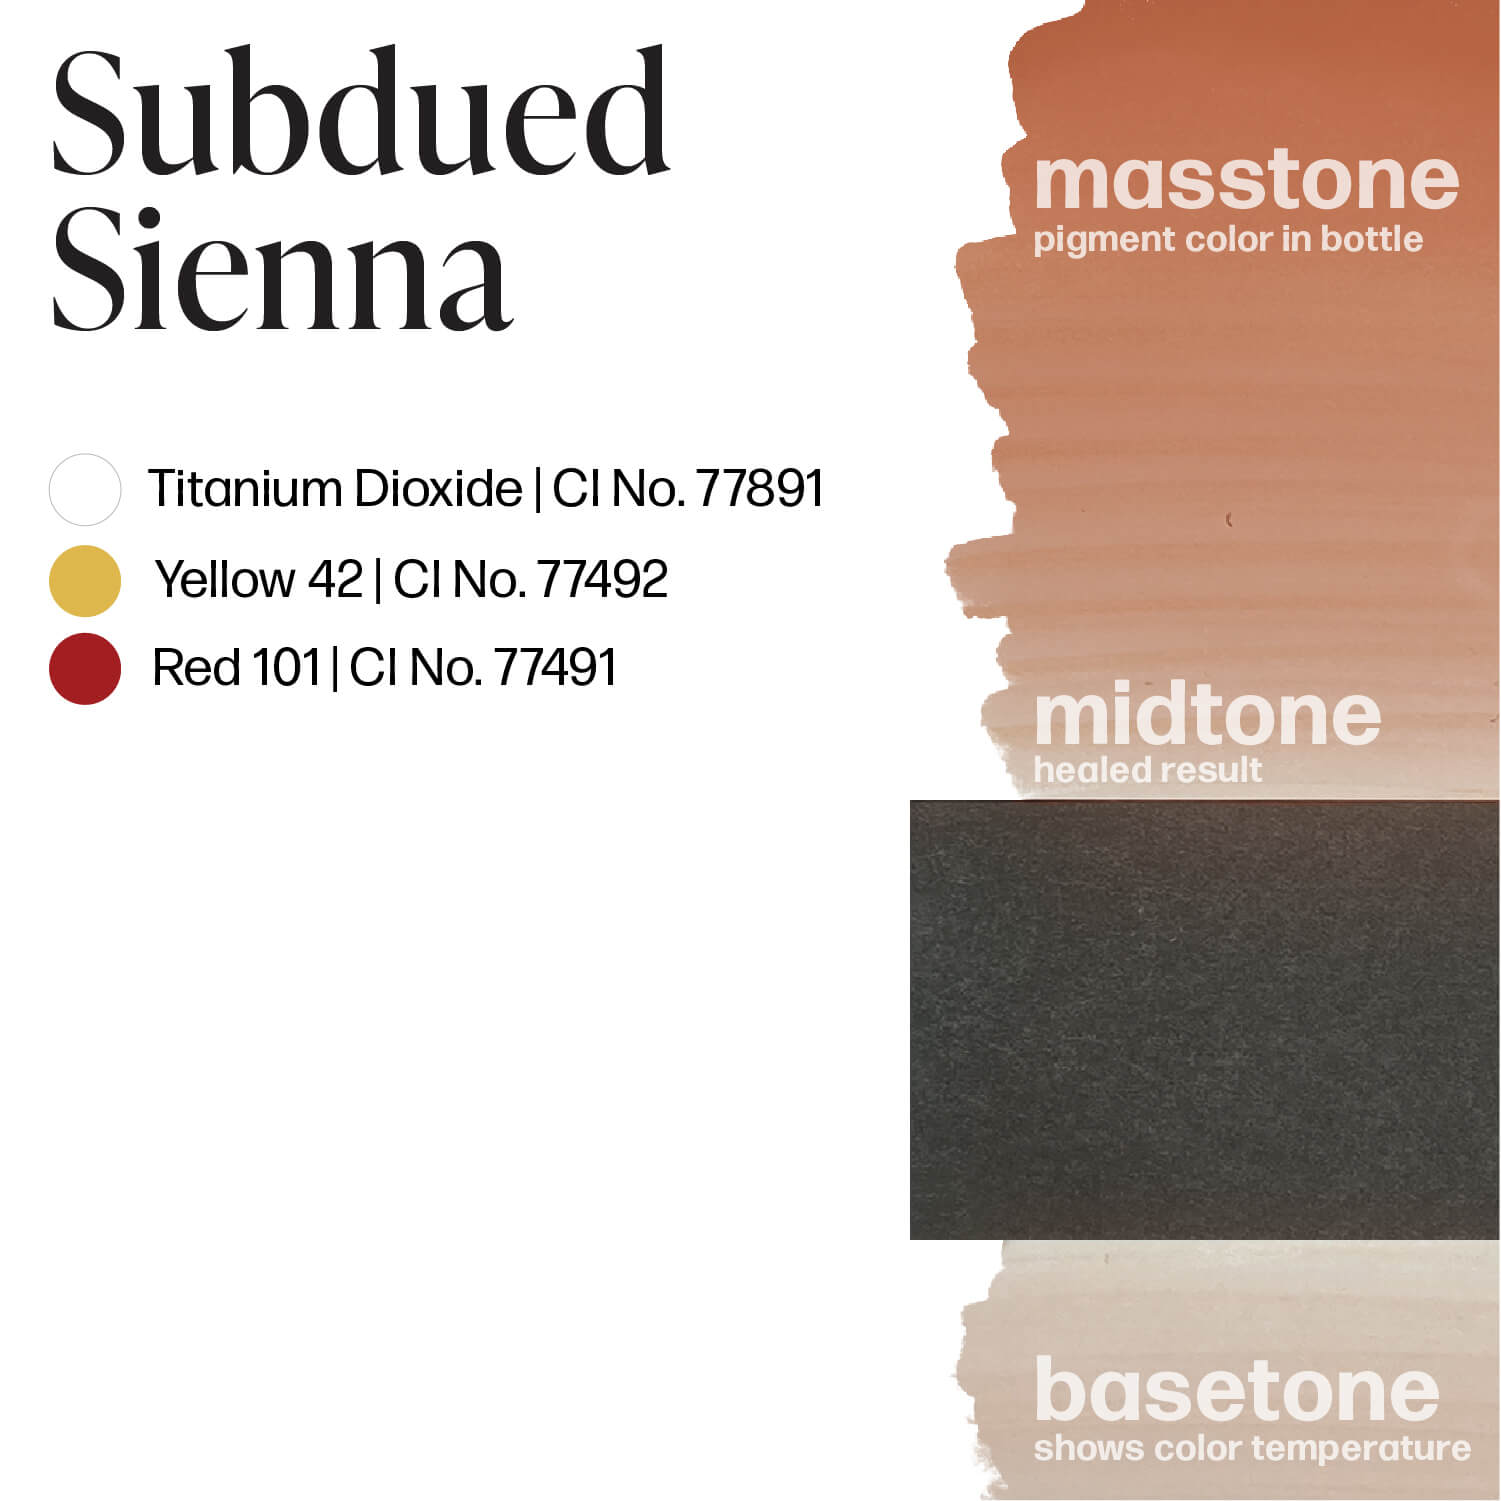 LUXE - Subdued Sienna